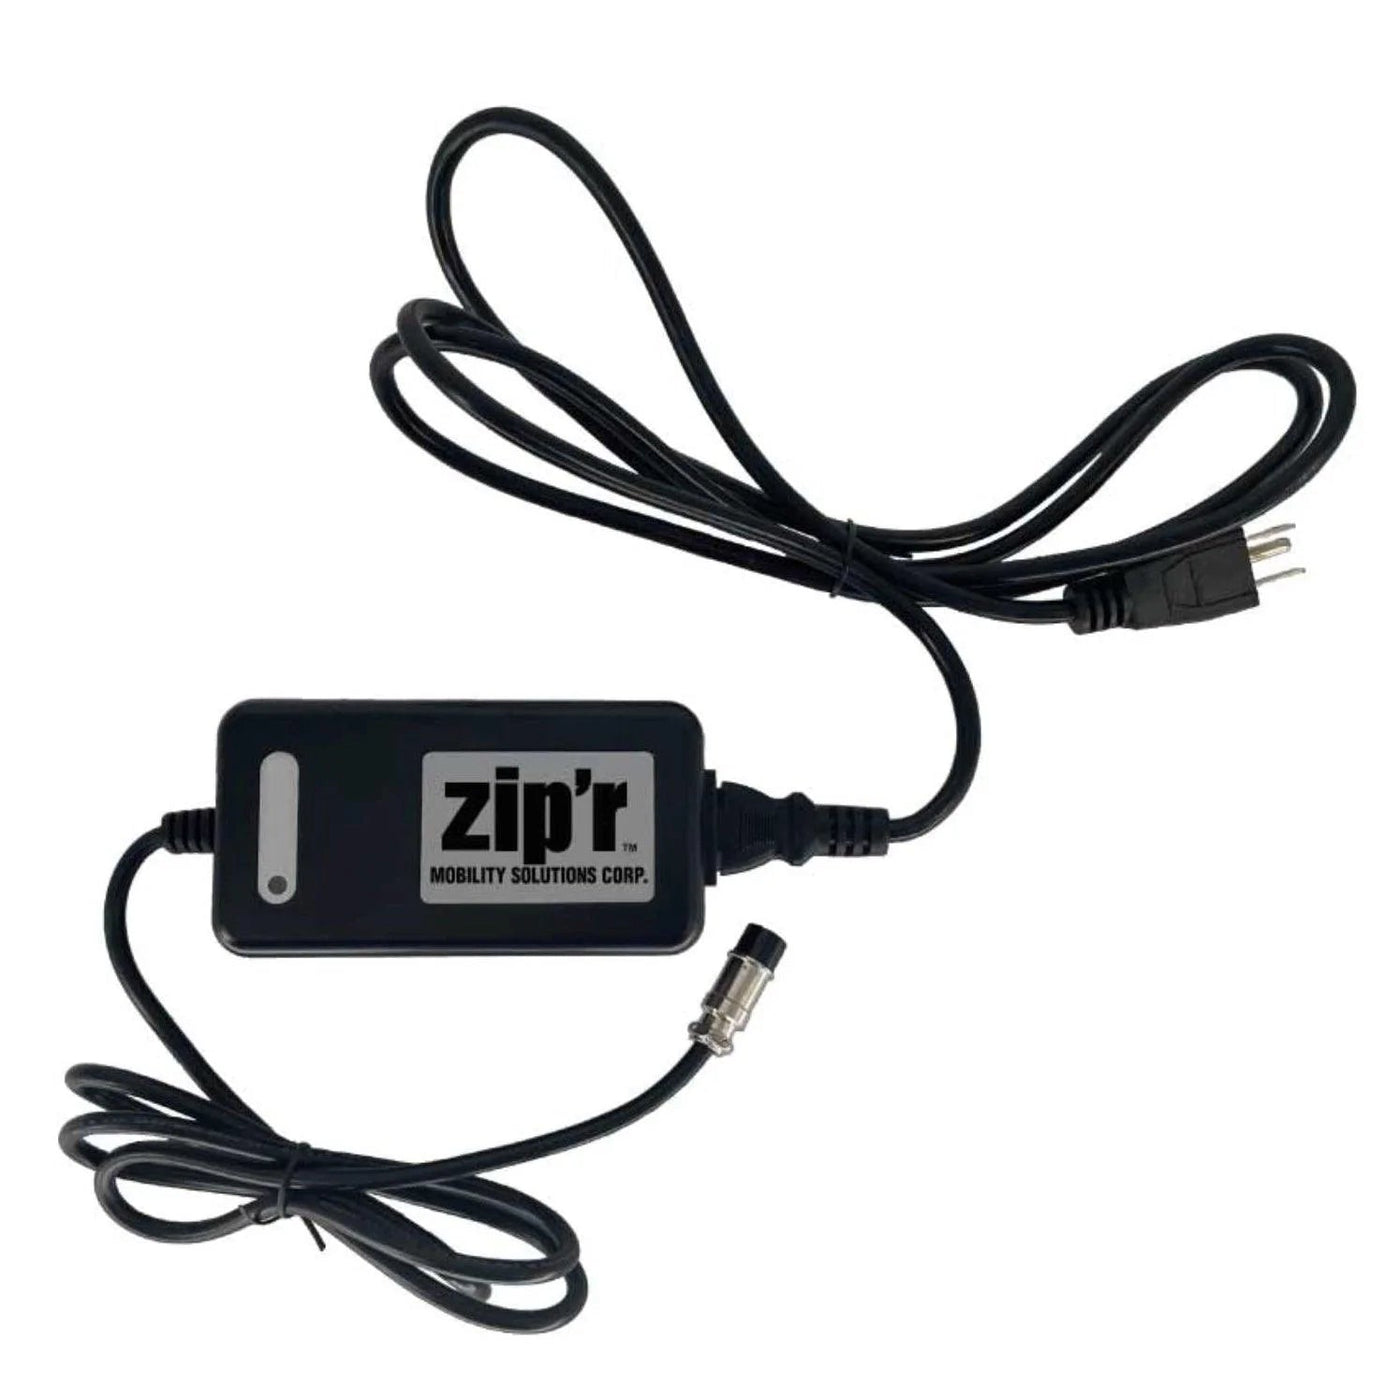 Zip'r Charger for Zip'r Roo Mobility Scooters-24V 2-AMP - eBike Haul